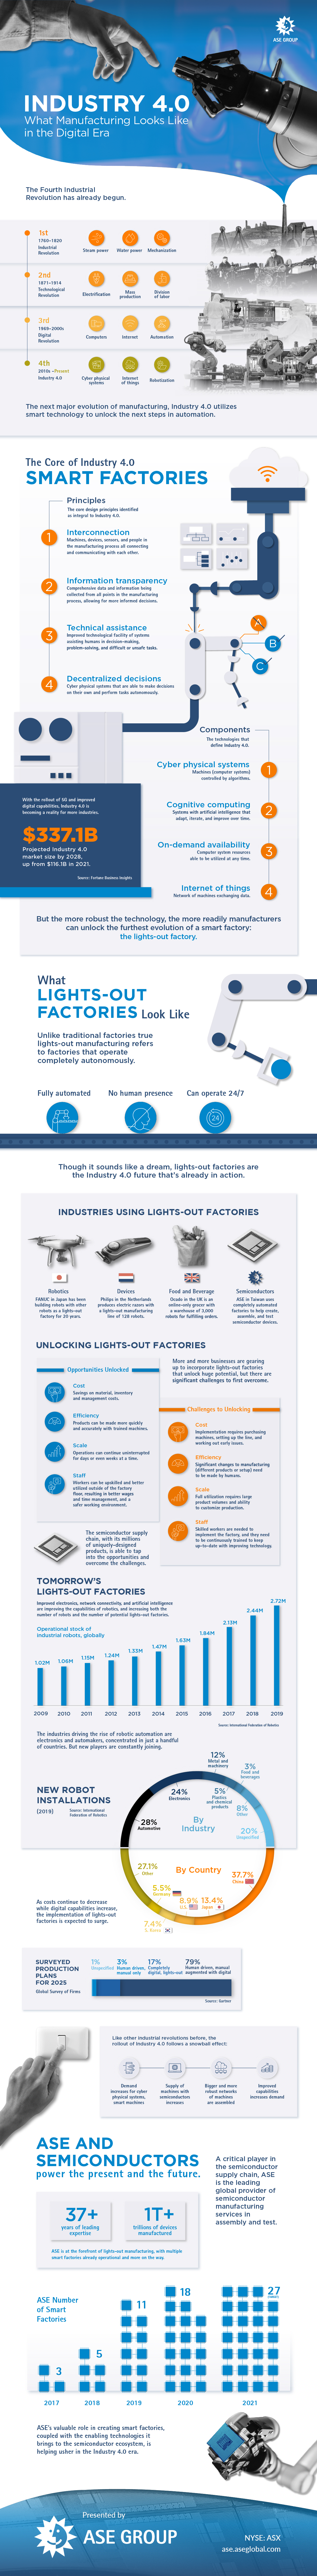 ASE Industry 4.0 Manufacturing in the Digital Era Main